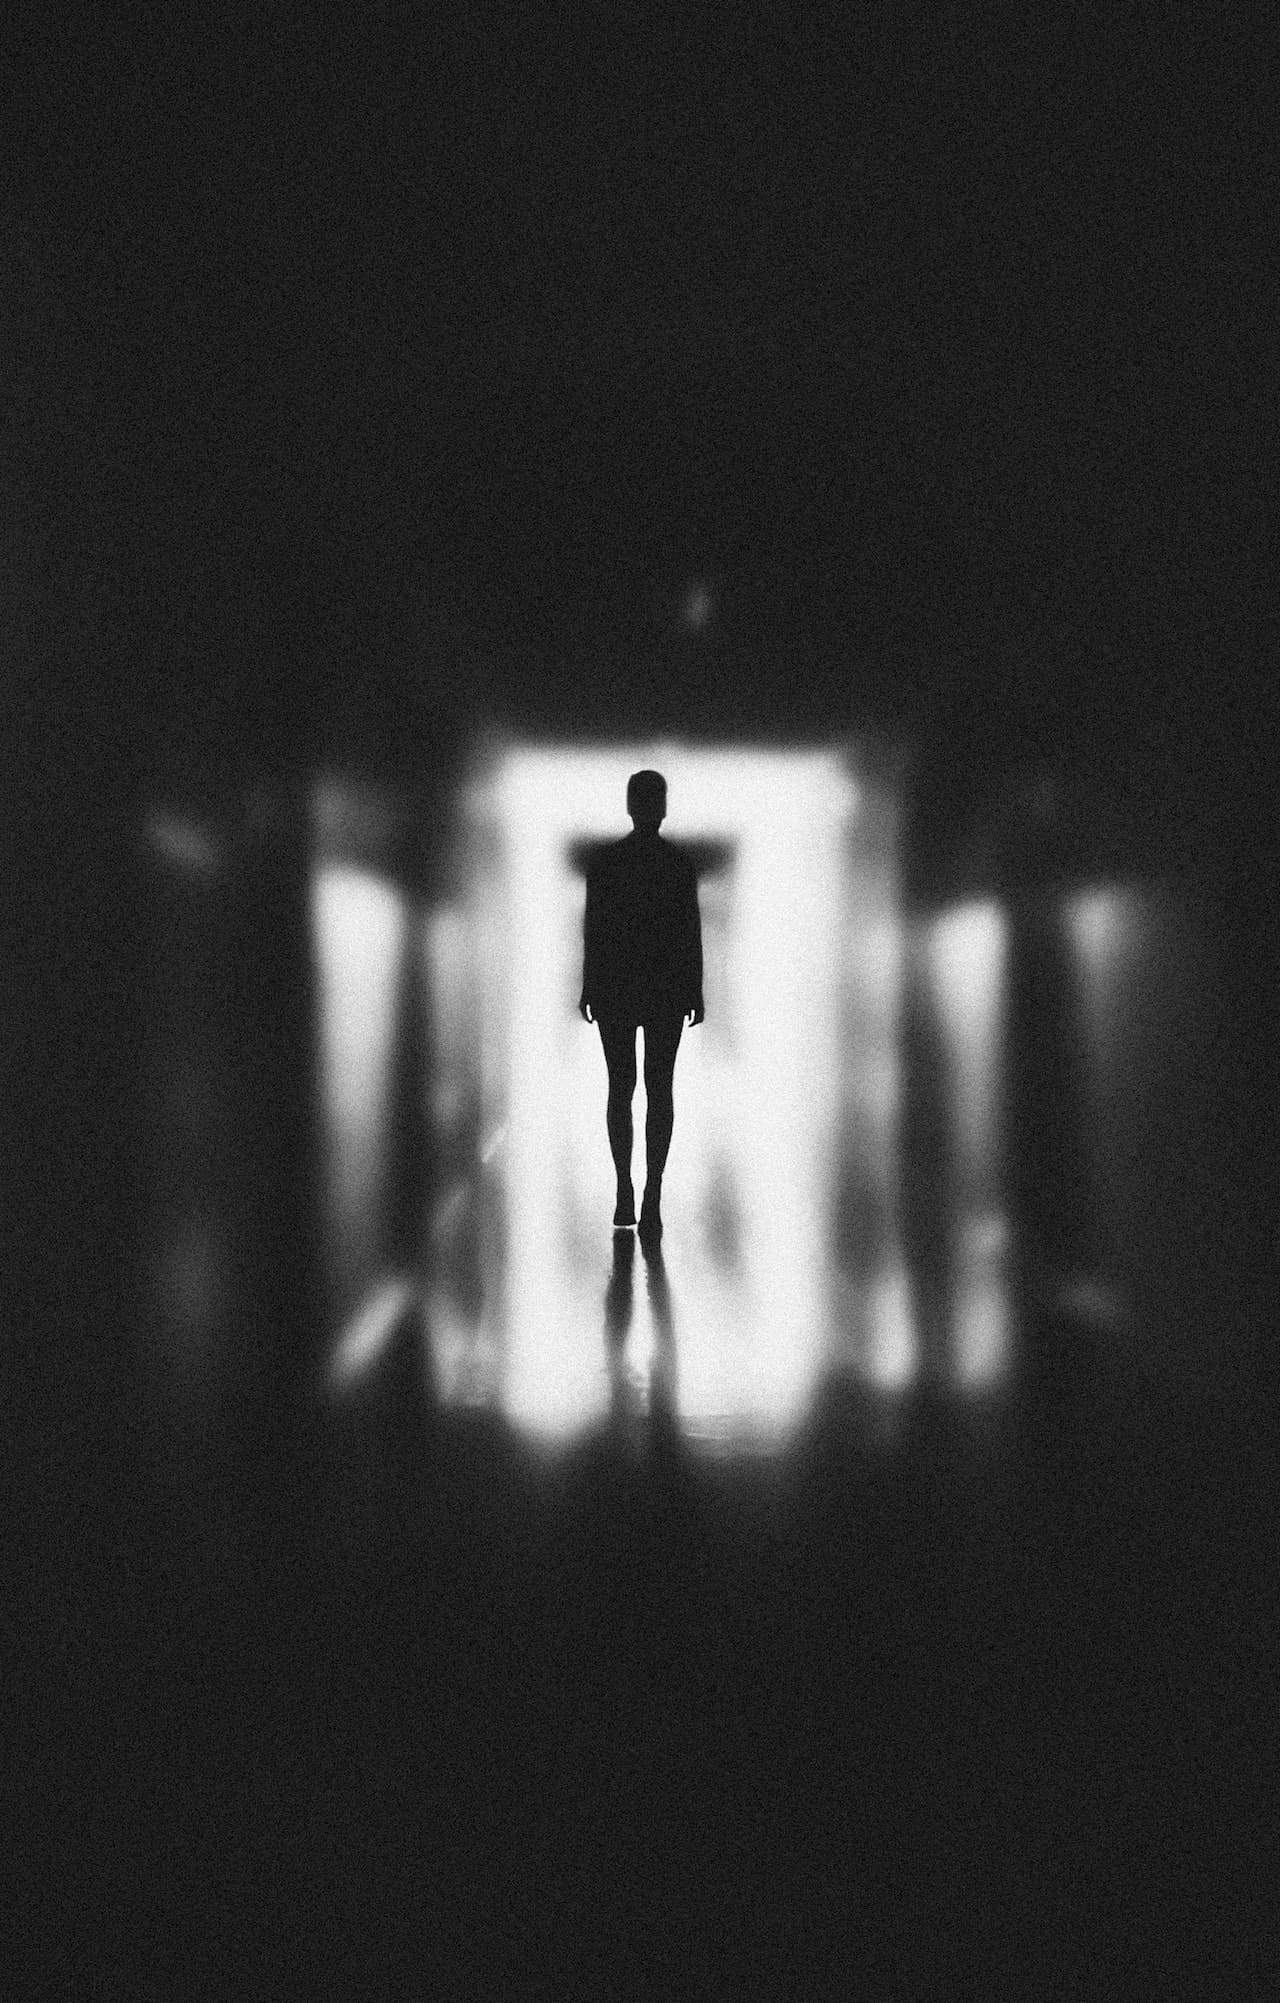 monochrome photo of a man standing on a hallway